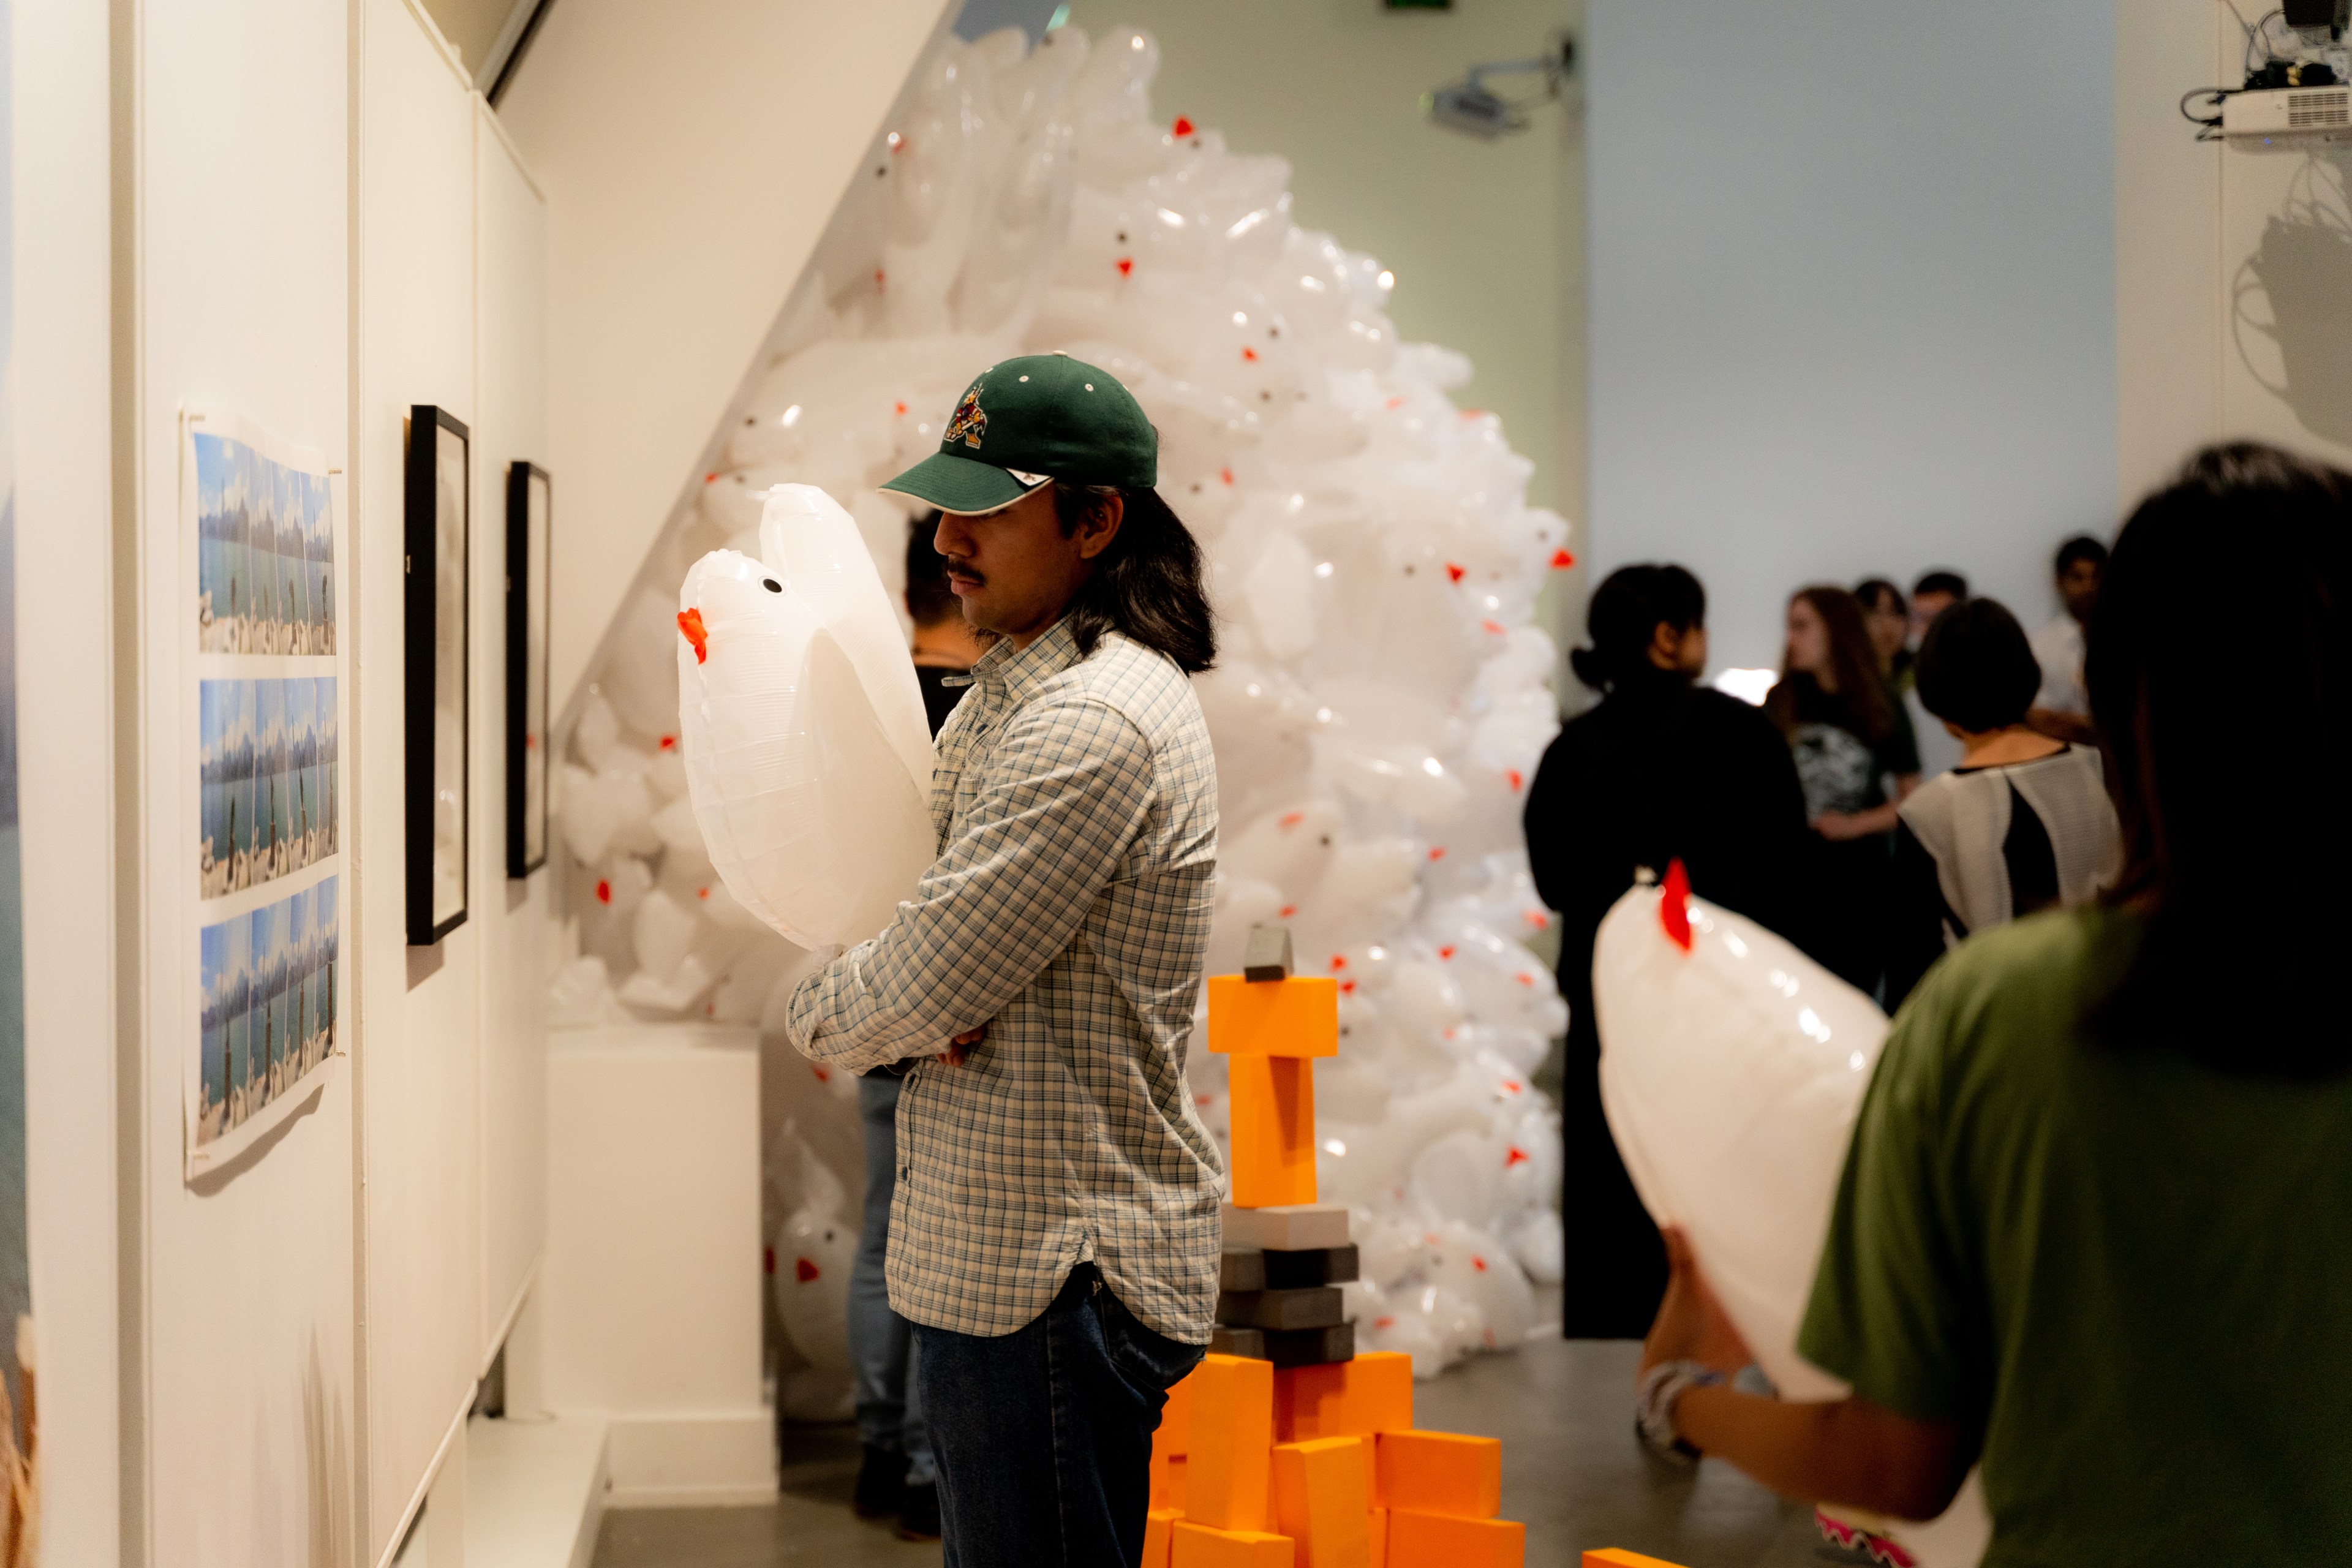 A man holds an inflatable pigeon in an art gallery.